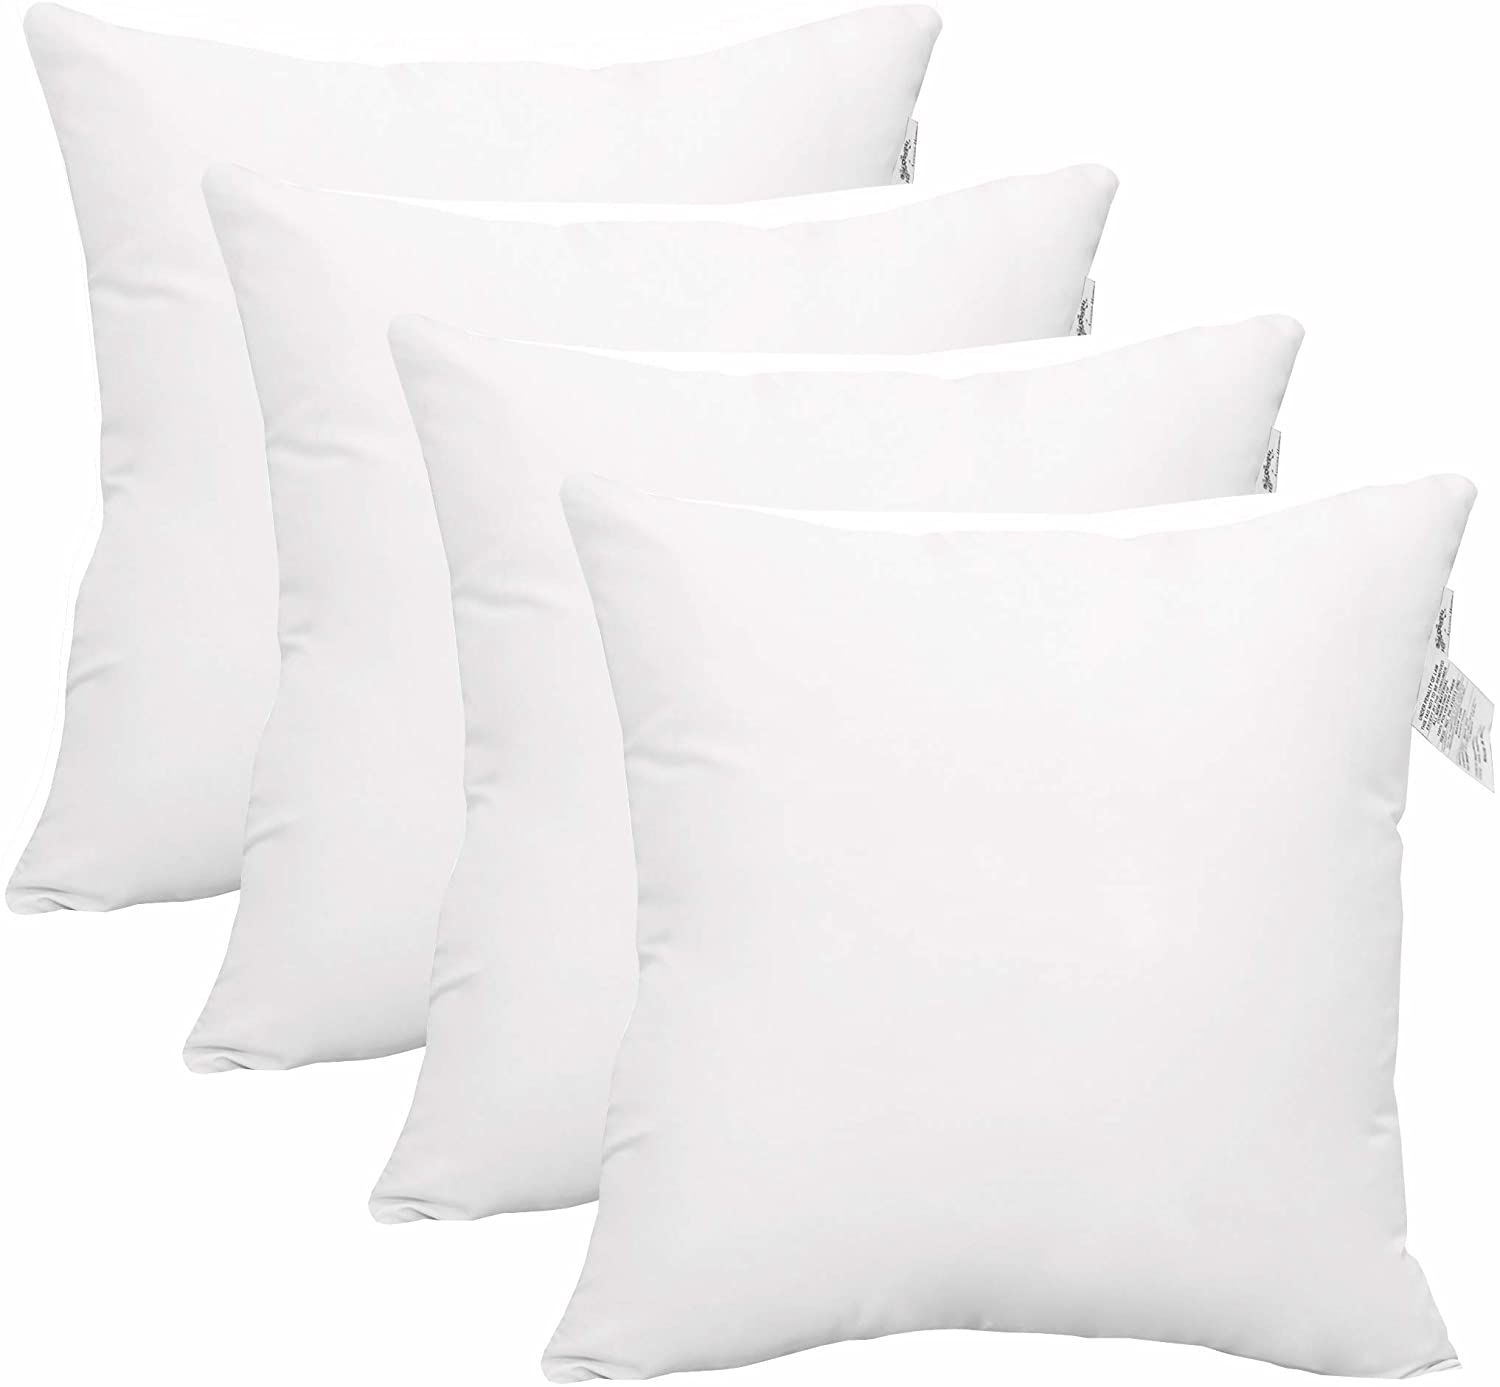 ACCENT HOME Pack of 4 pc Hypoallergenic Square Form Decorative Throw Pillow Inserts Couch Sham Cushion Stuffer - 18 x 18 inches - image 1 of 7